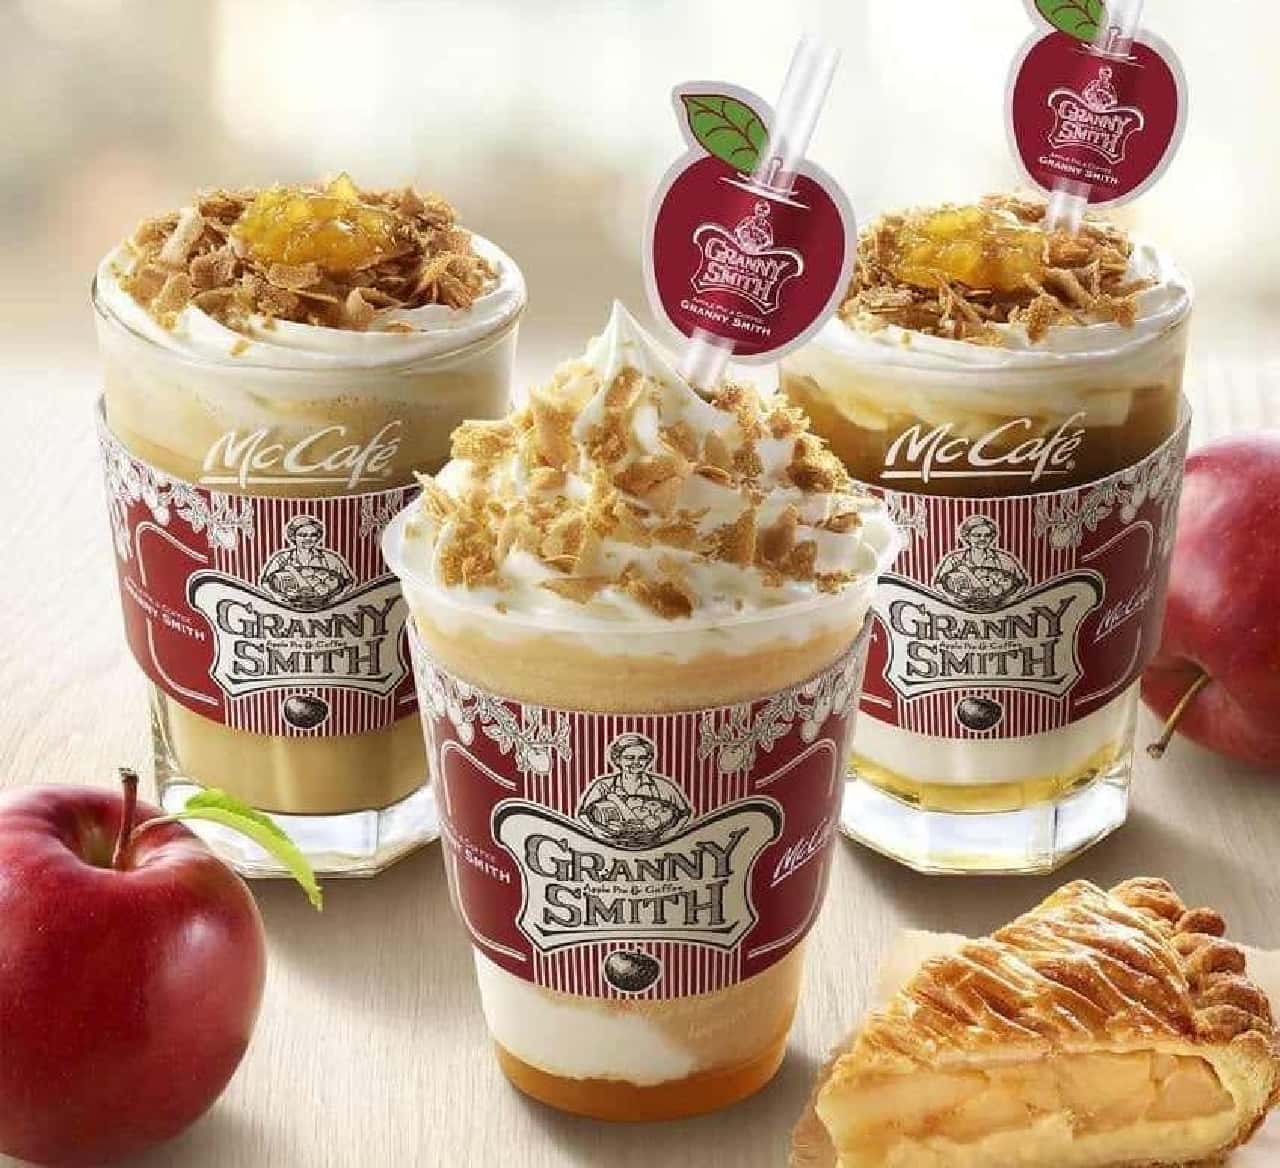 3 types of "apple pie drink" in collaboration with McCafé and Granny Smith